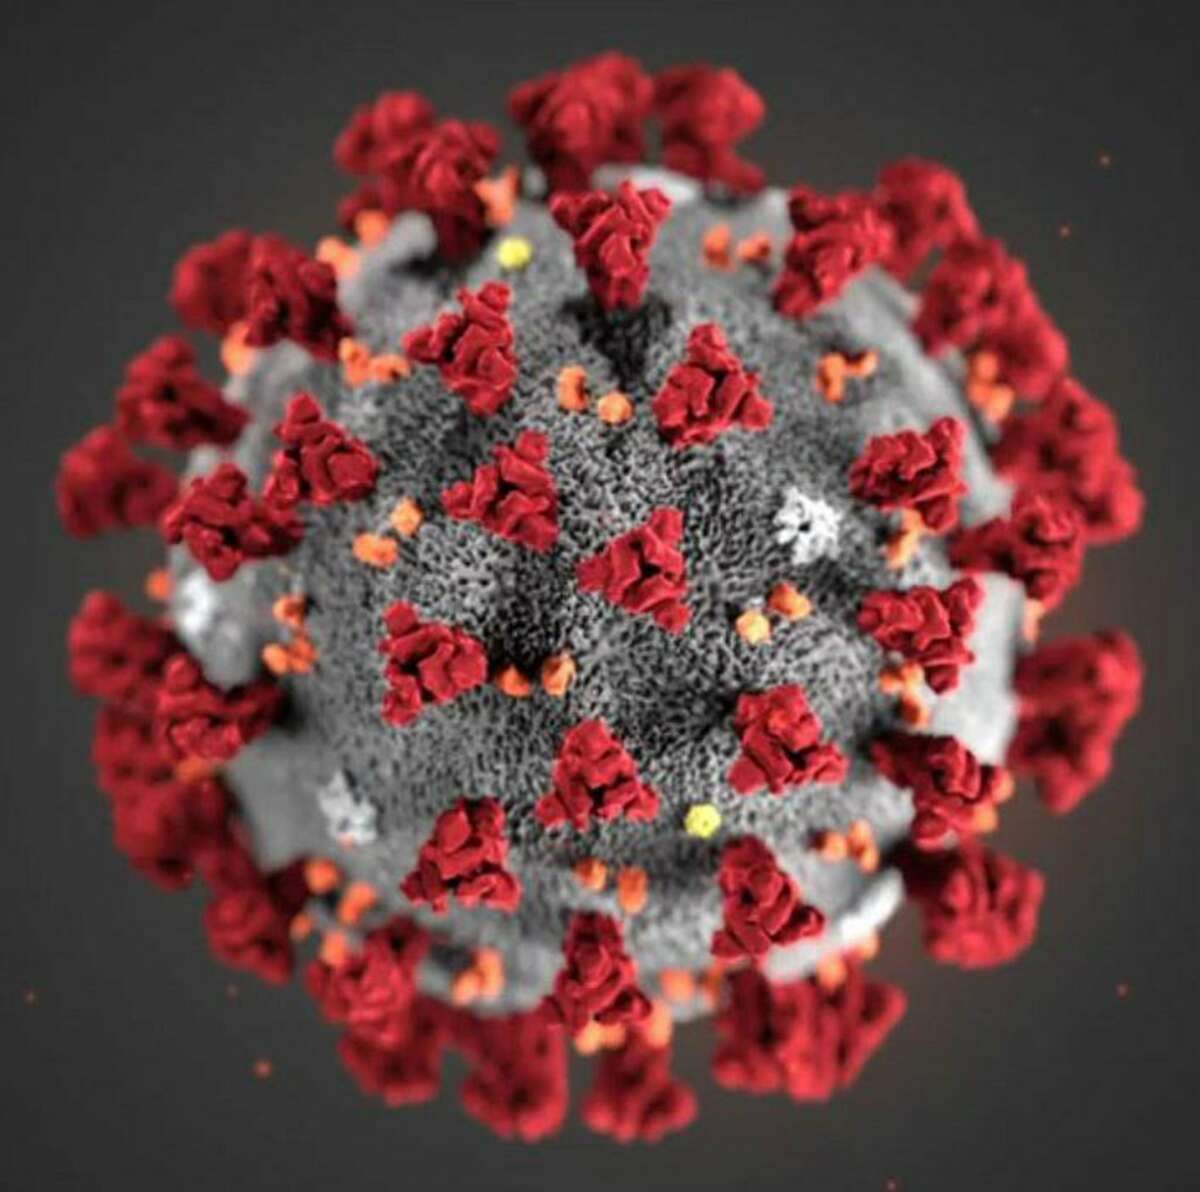 A COVID-19 virus is shown in this image provided by the CDC.